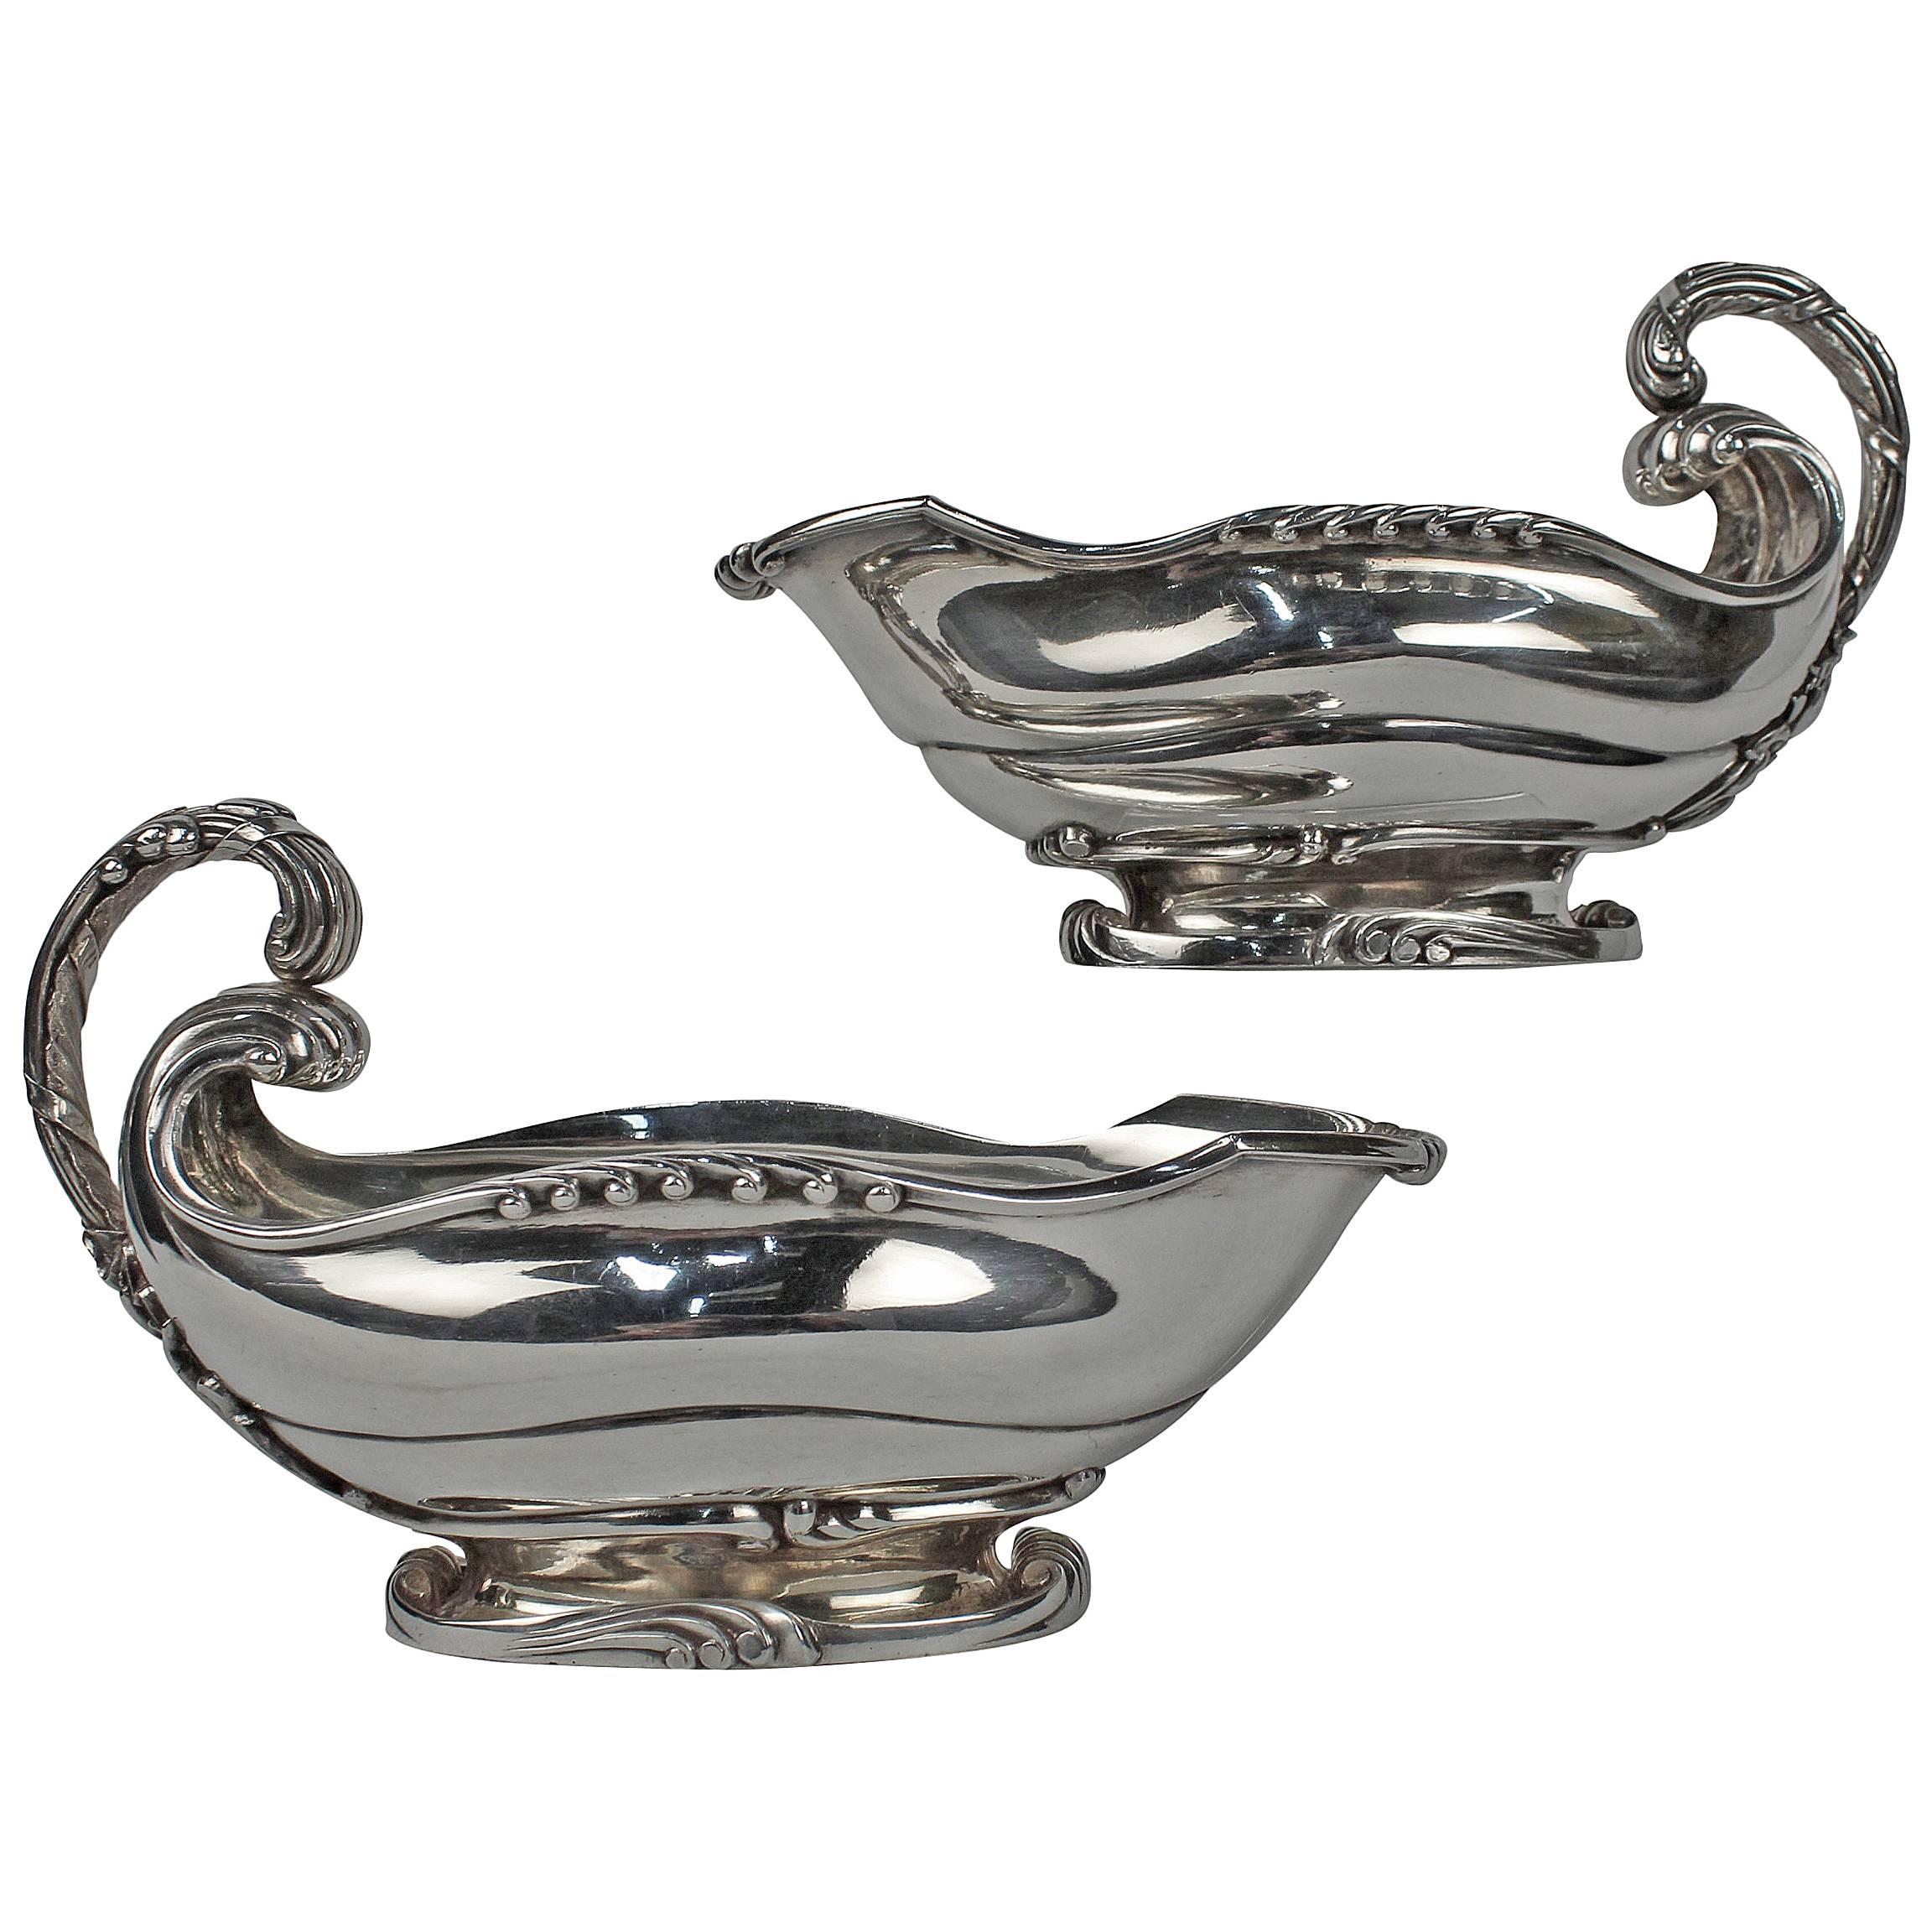 Pair of Art Nouveau Dutch Sterling Silver Sauce Boats with Cattails by Ph Saakes